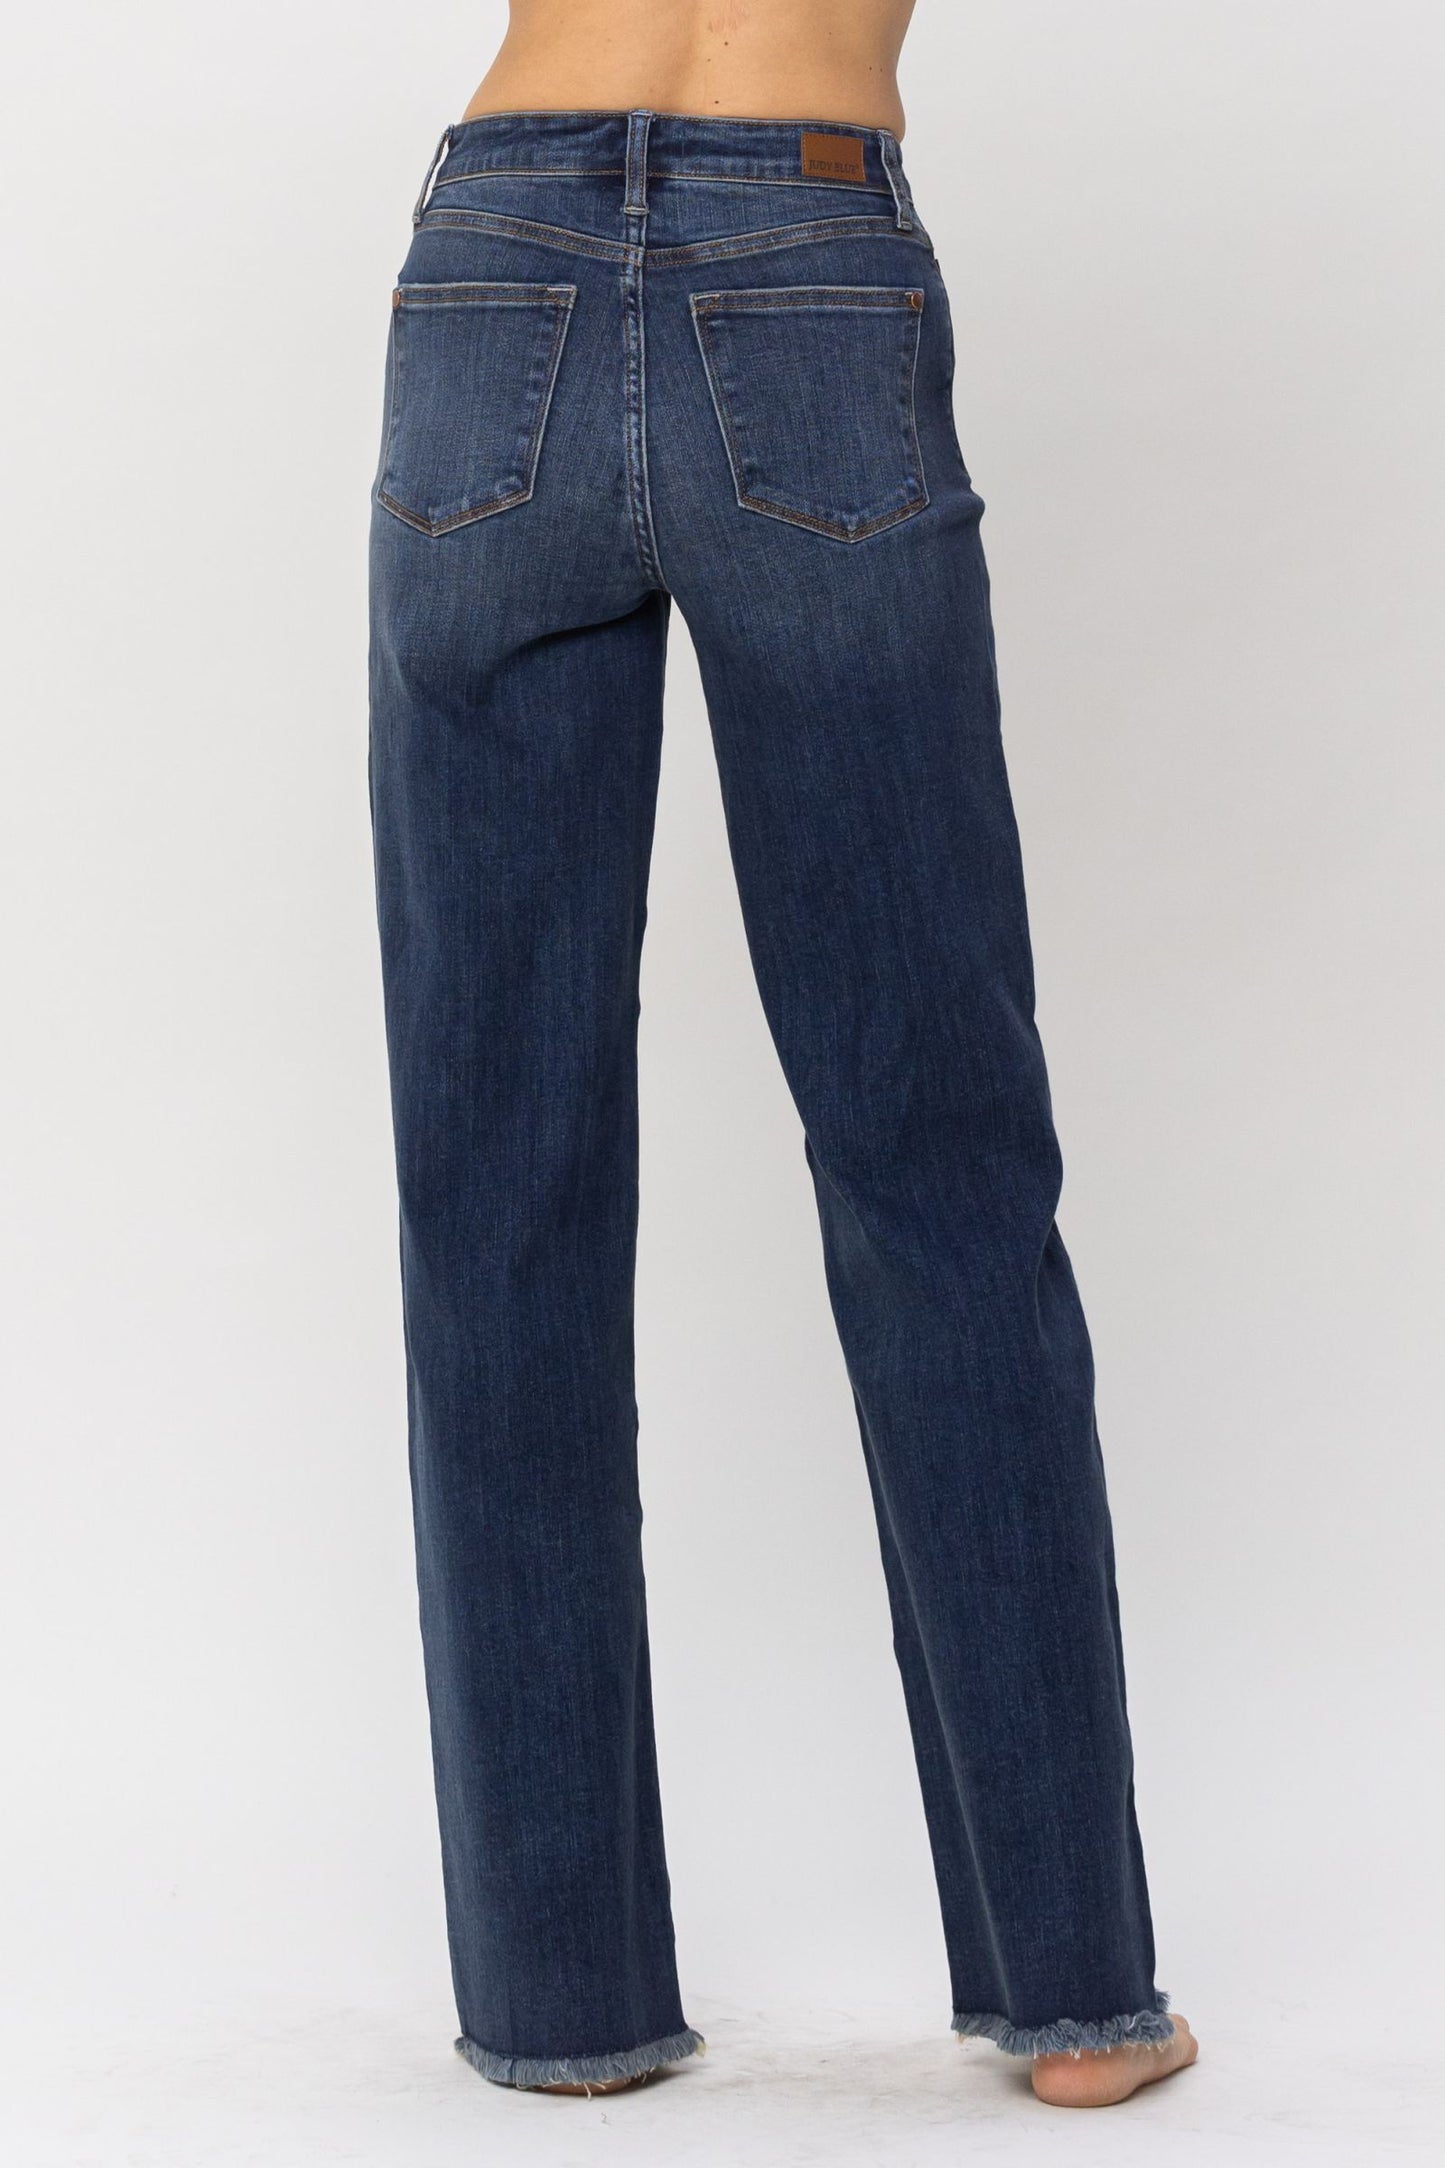 Judy Blue® Dark Wash Button Fly Jeans With Fray Edge on Leg